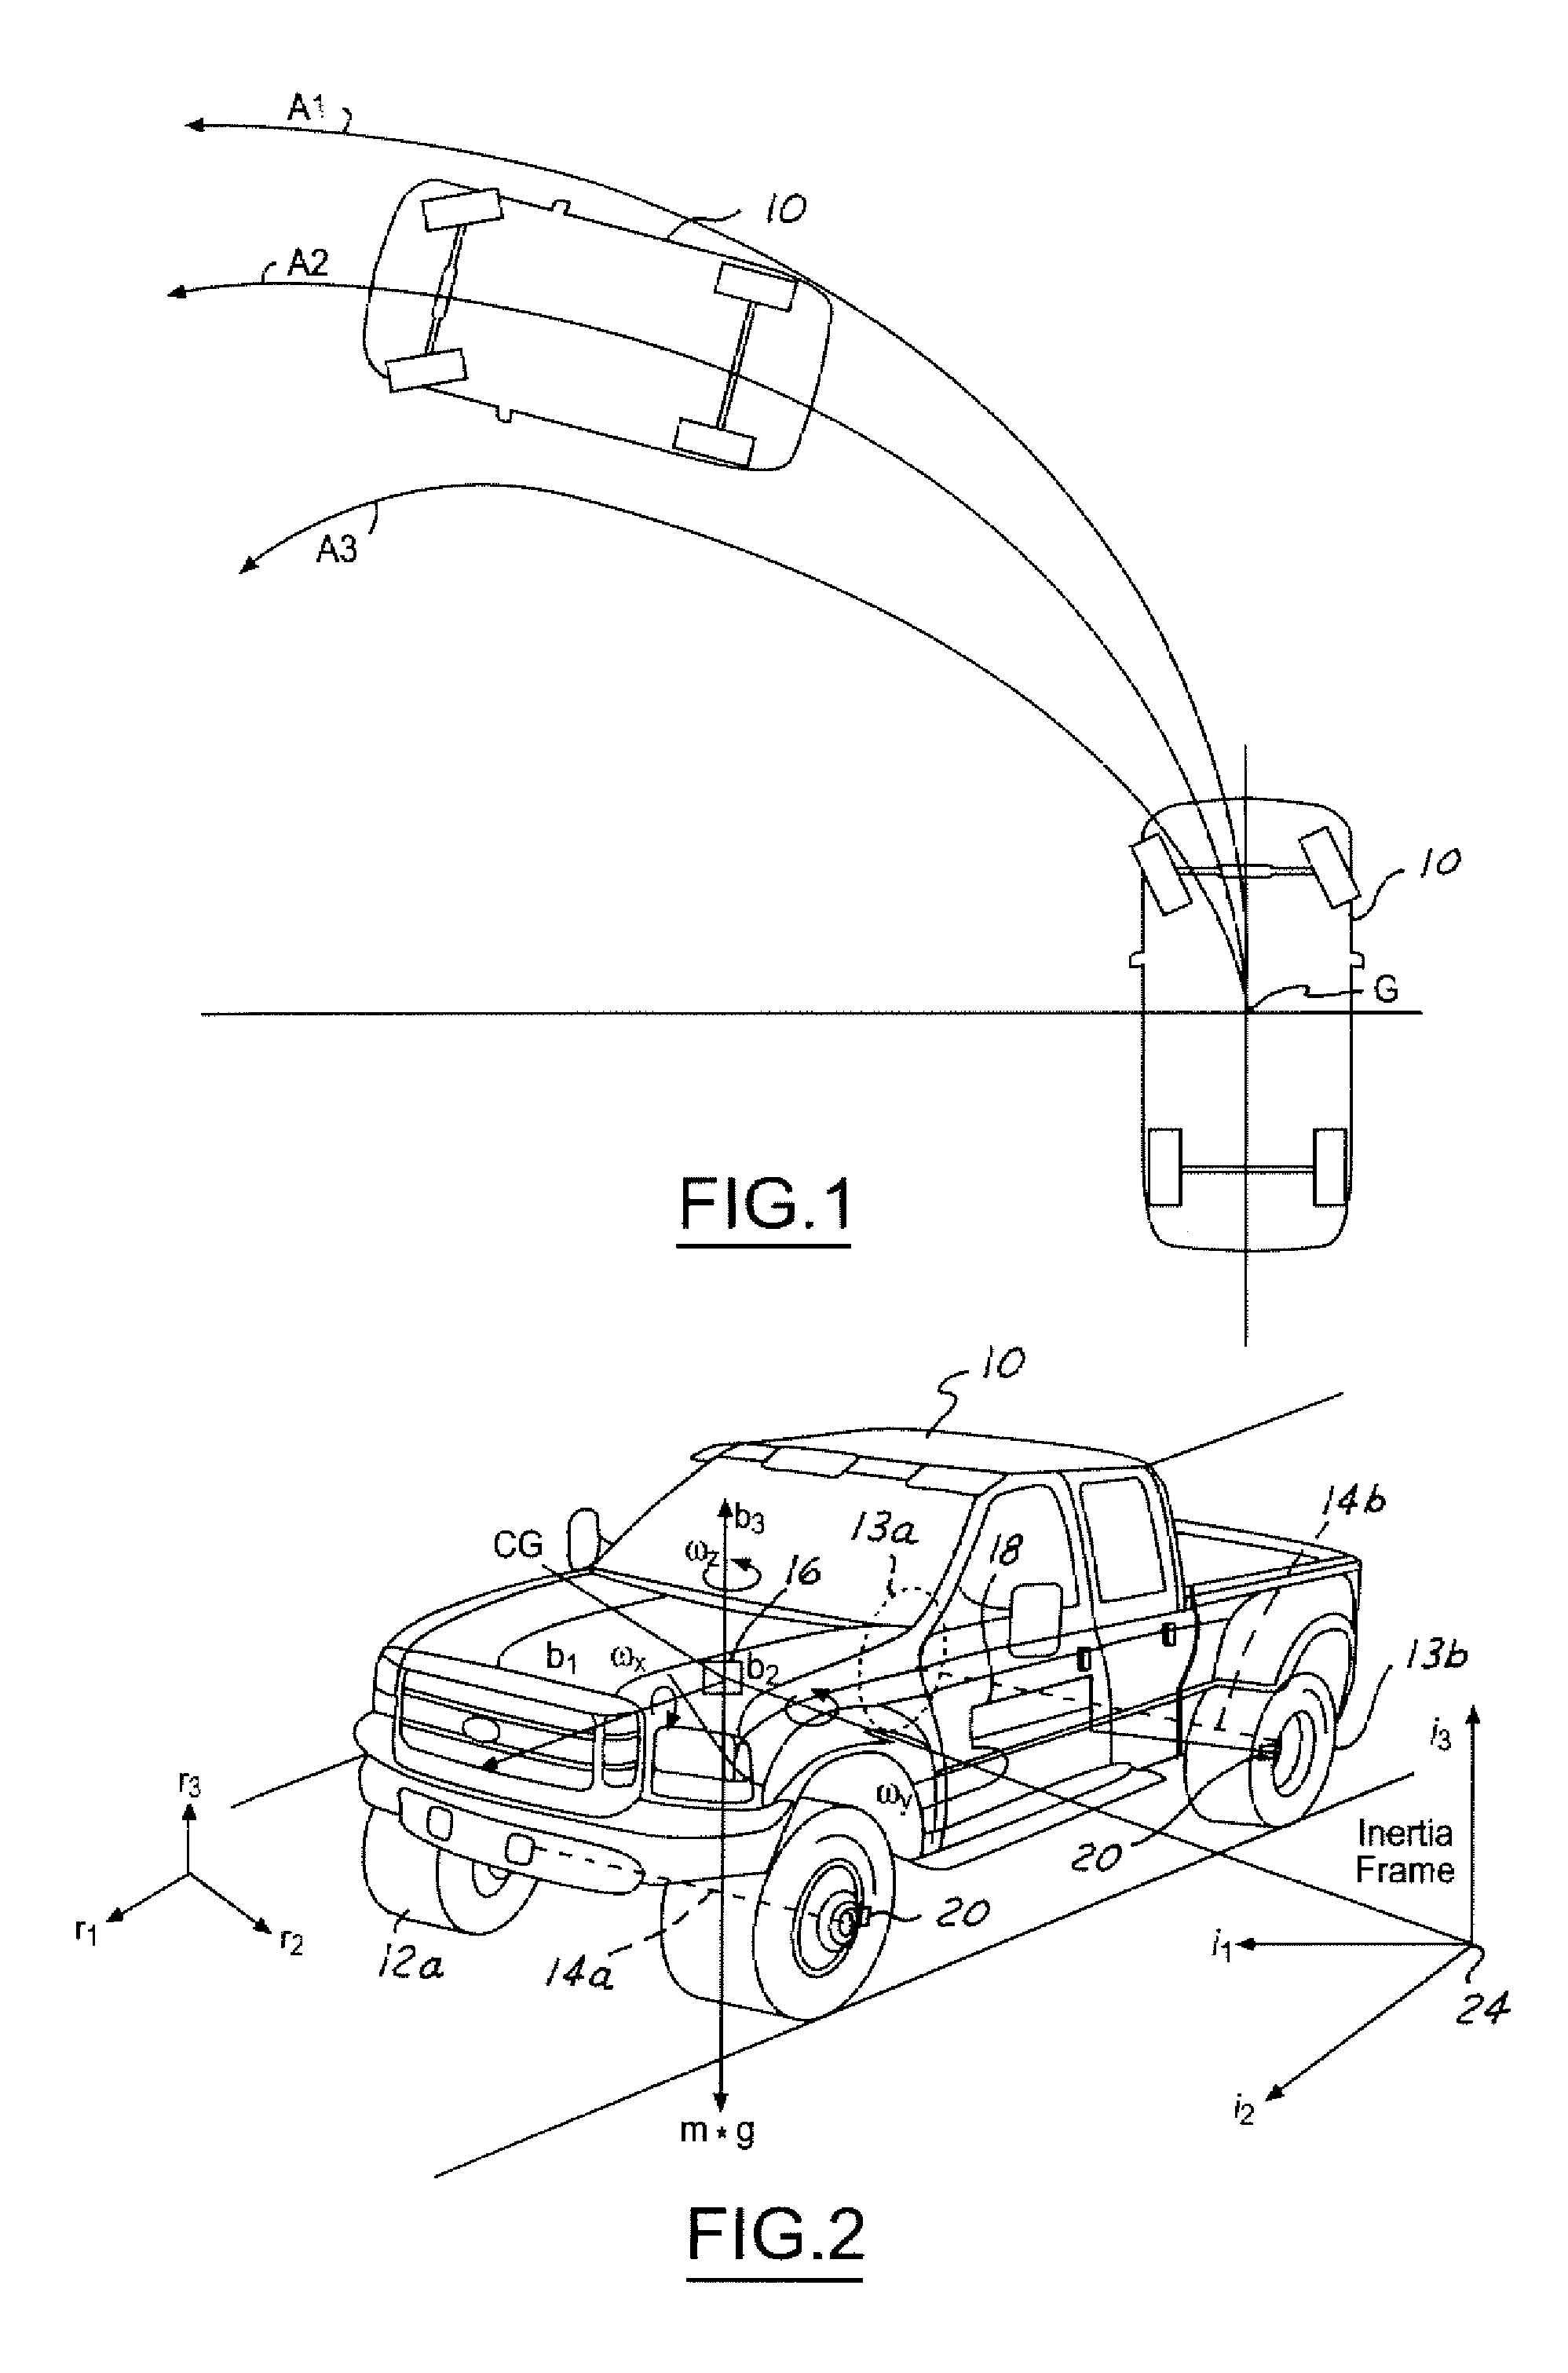 Method and apparatus for controlling a vehicle using an object detection system and brake-steer